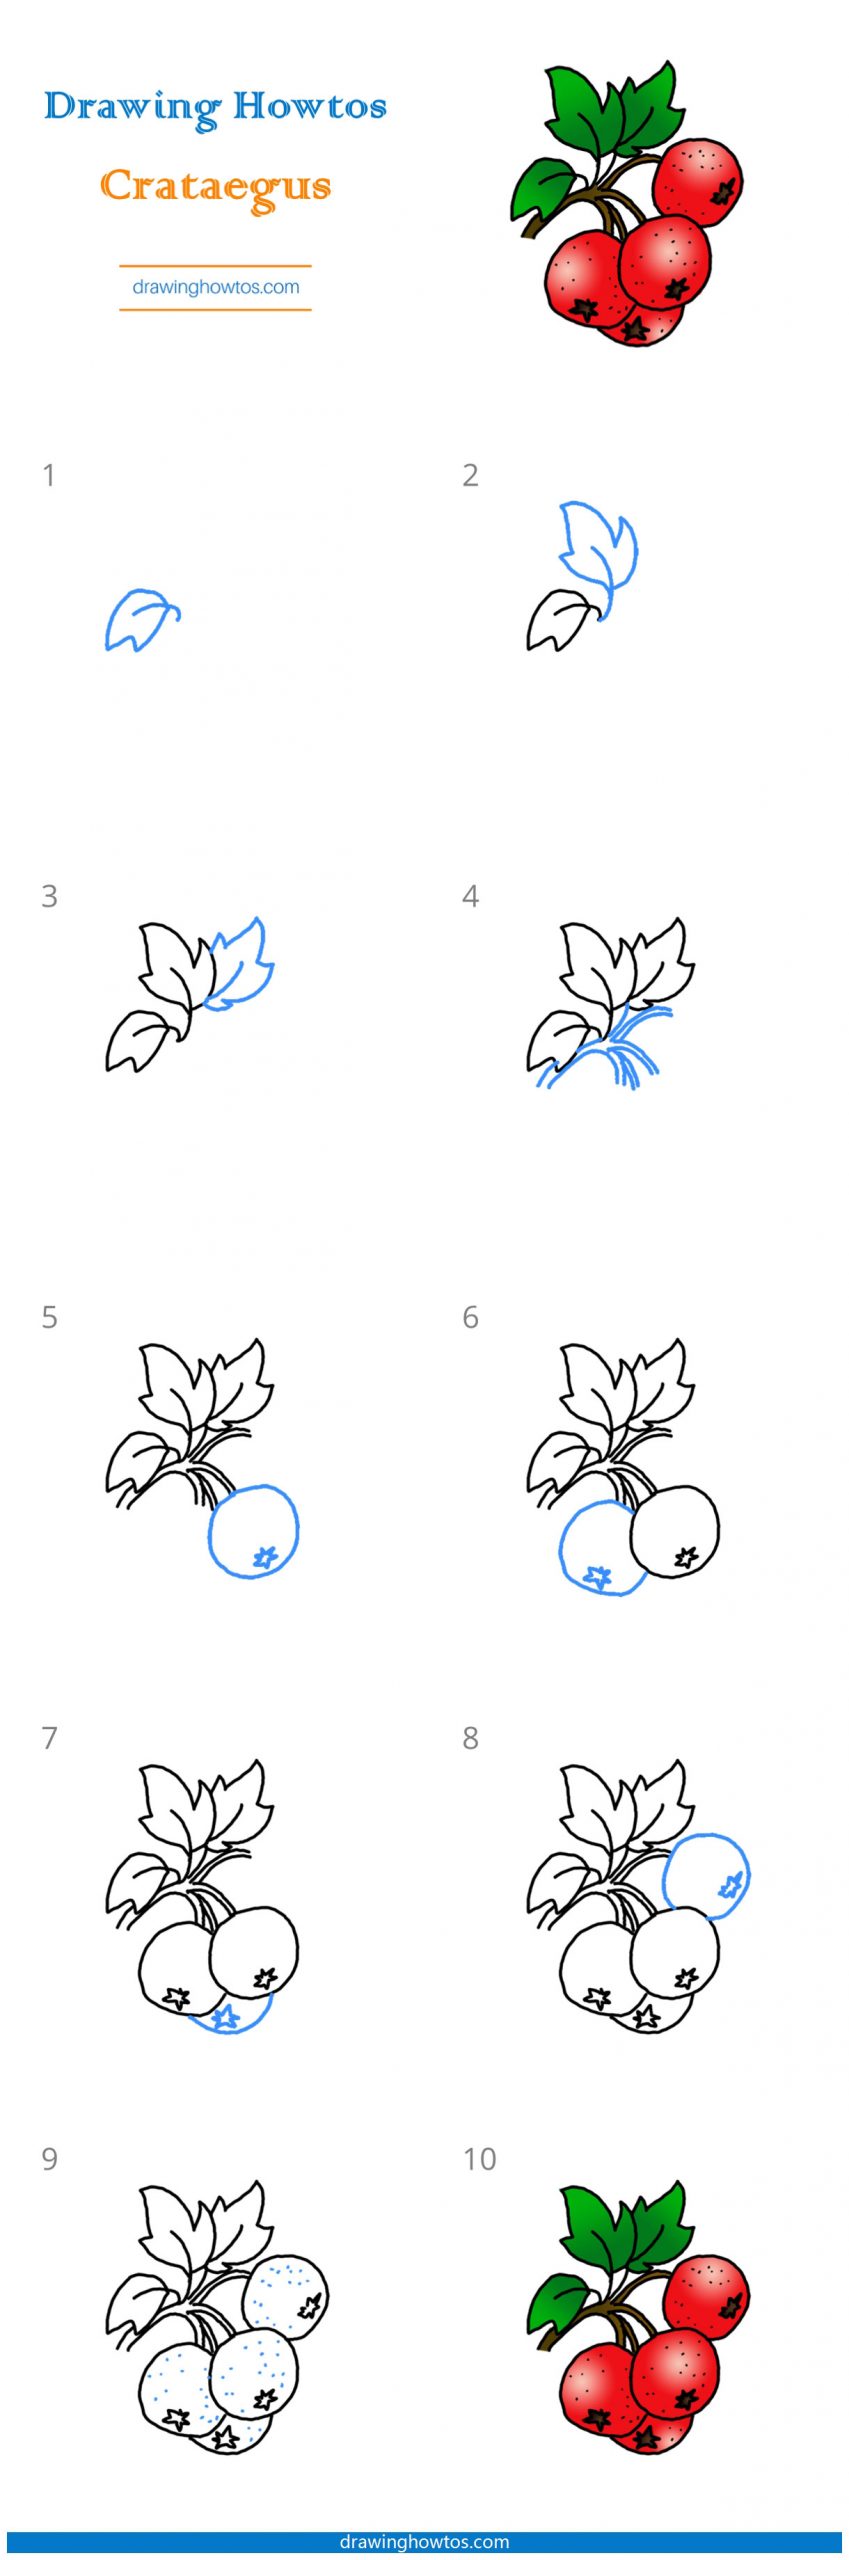 How to Draw Hawthorn Berries Step by Step